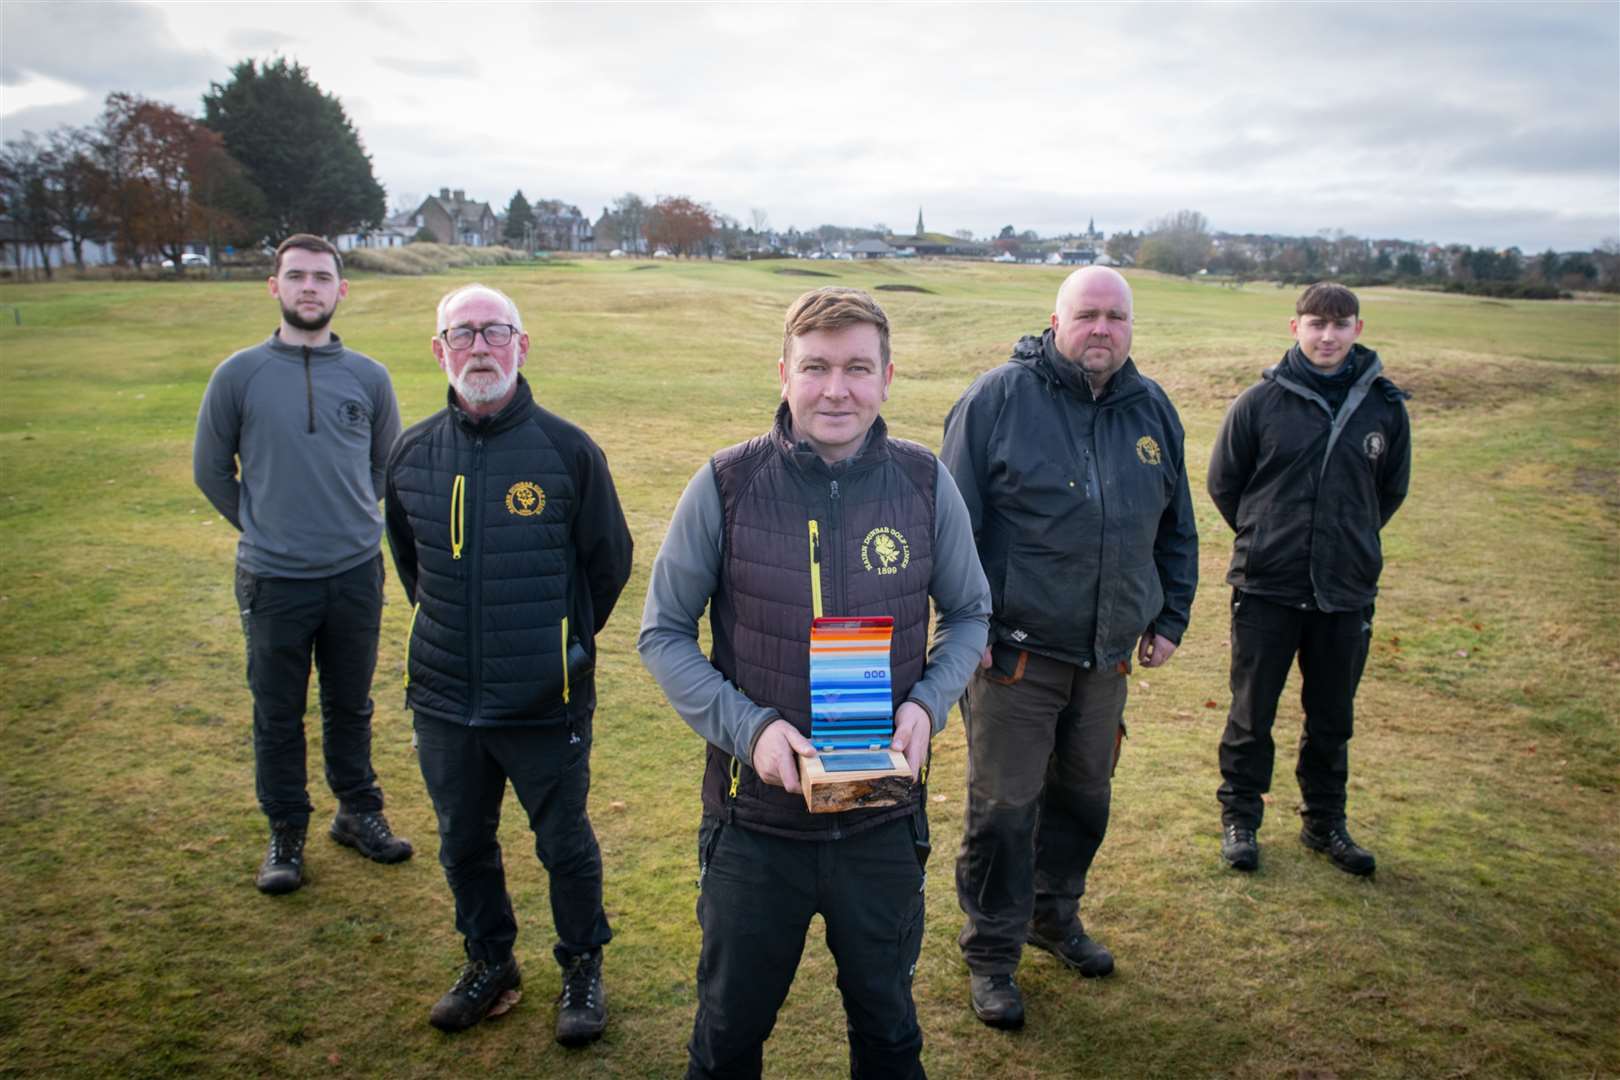 Nathan Grant - Apprentice Greenkeeper, Donald Forbes - Course Labourer, Richard Johnstone - Course Manager,.Graham Burnett - Deputy Course Manager and Ryan Knox - Assistant Greenkeeper..Not pictured Michael McInnes - Assistant Greenkeeper..Picture: Callum Mackay..